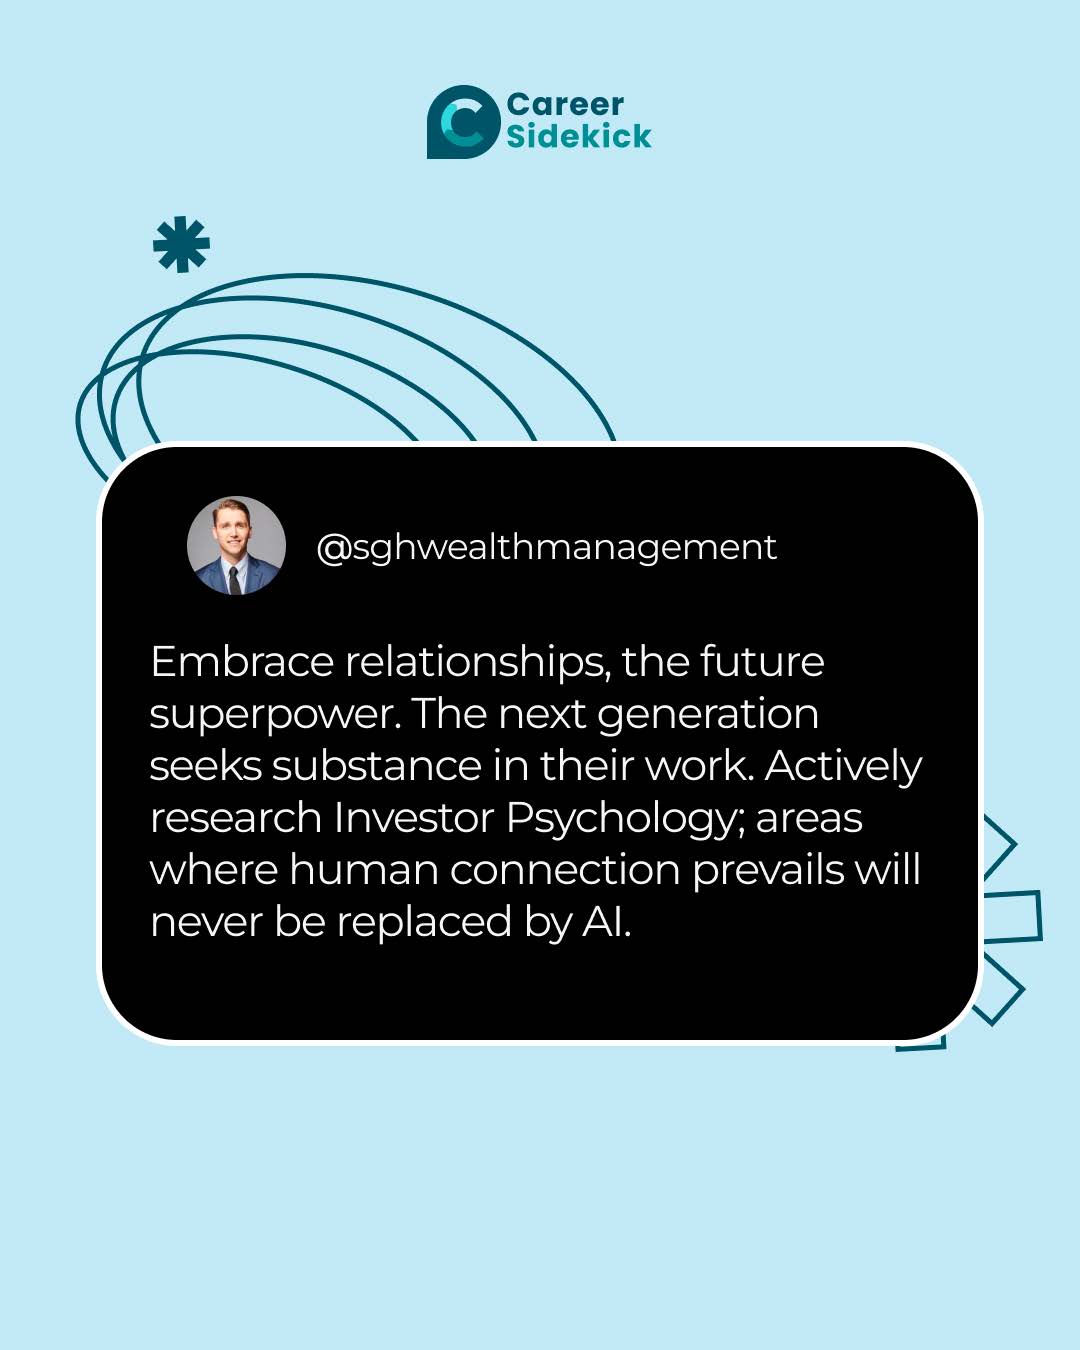 Embrace relationships, the future superpower. The next generation seeks substance in their work. Actively research Investor Psychology; areas where human connection prevails will never be replaced by AI.